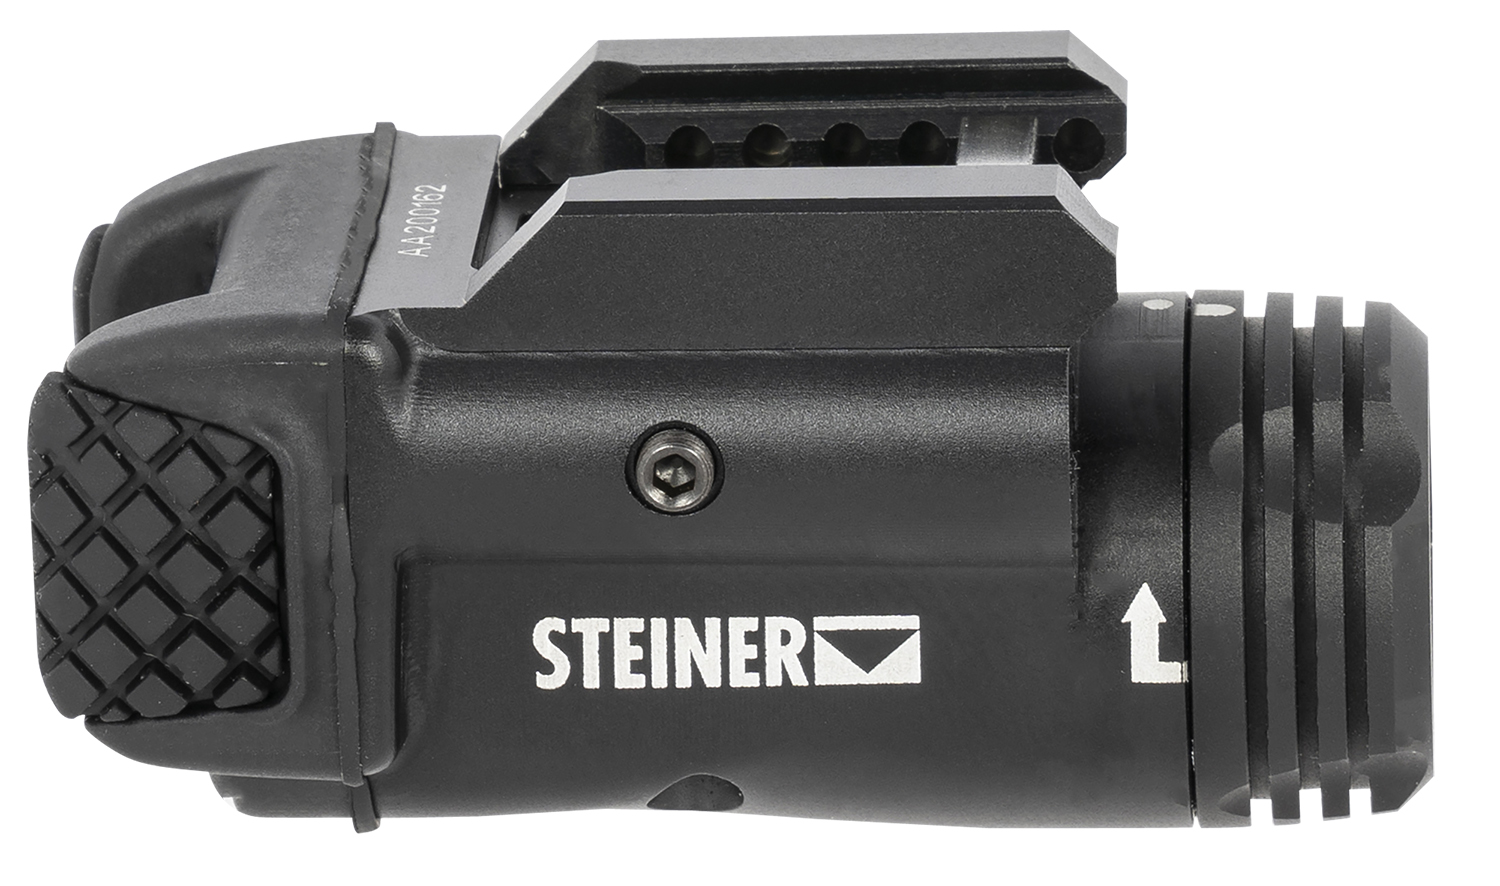 Steiner 7005 TOR Fusion 5mW Red Laser with 520nM Wavelength & 500 Lumens White LED Light with Black Finish for Picatinny or Weaver Rail Equipped Handgun